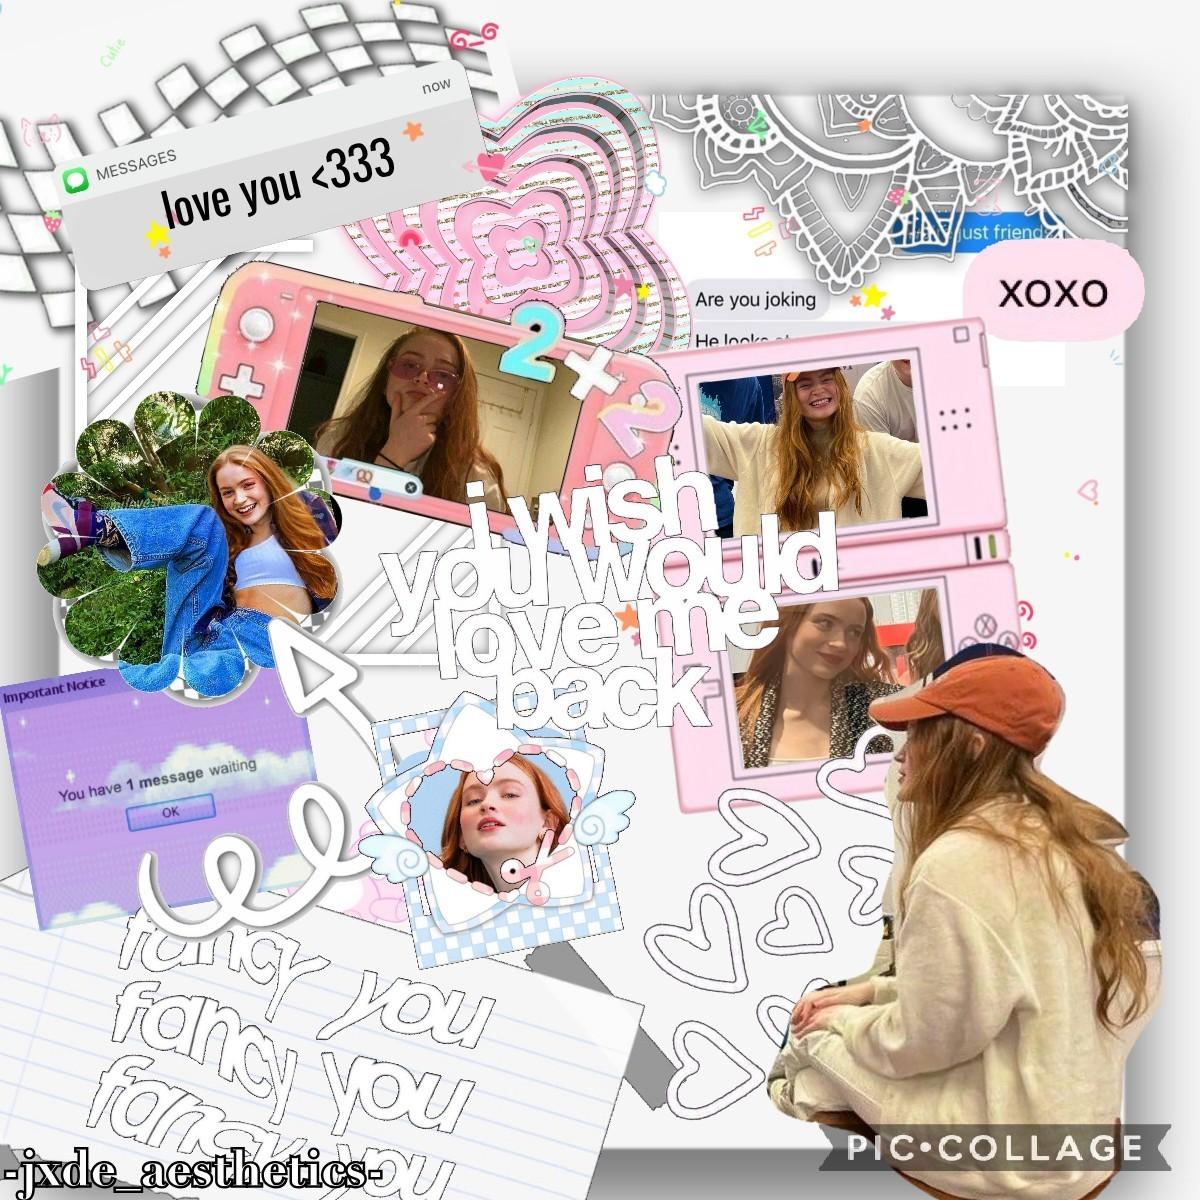 ♥tap♥
okay here's Sadie sink literally such an amazing actor!!
she was so good in vol 2 like omg lol.
so this took me about an hour to do so I'm really really proud of it!!
qotd: favorite food?
mine is probably chick fil flay :3
bye have an amazing day ev